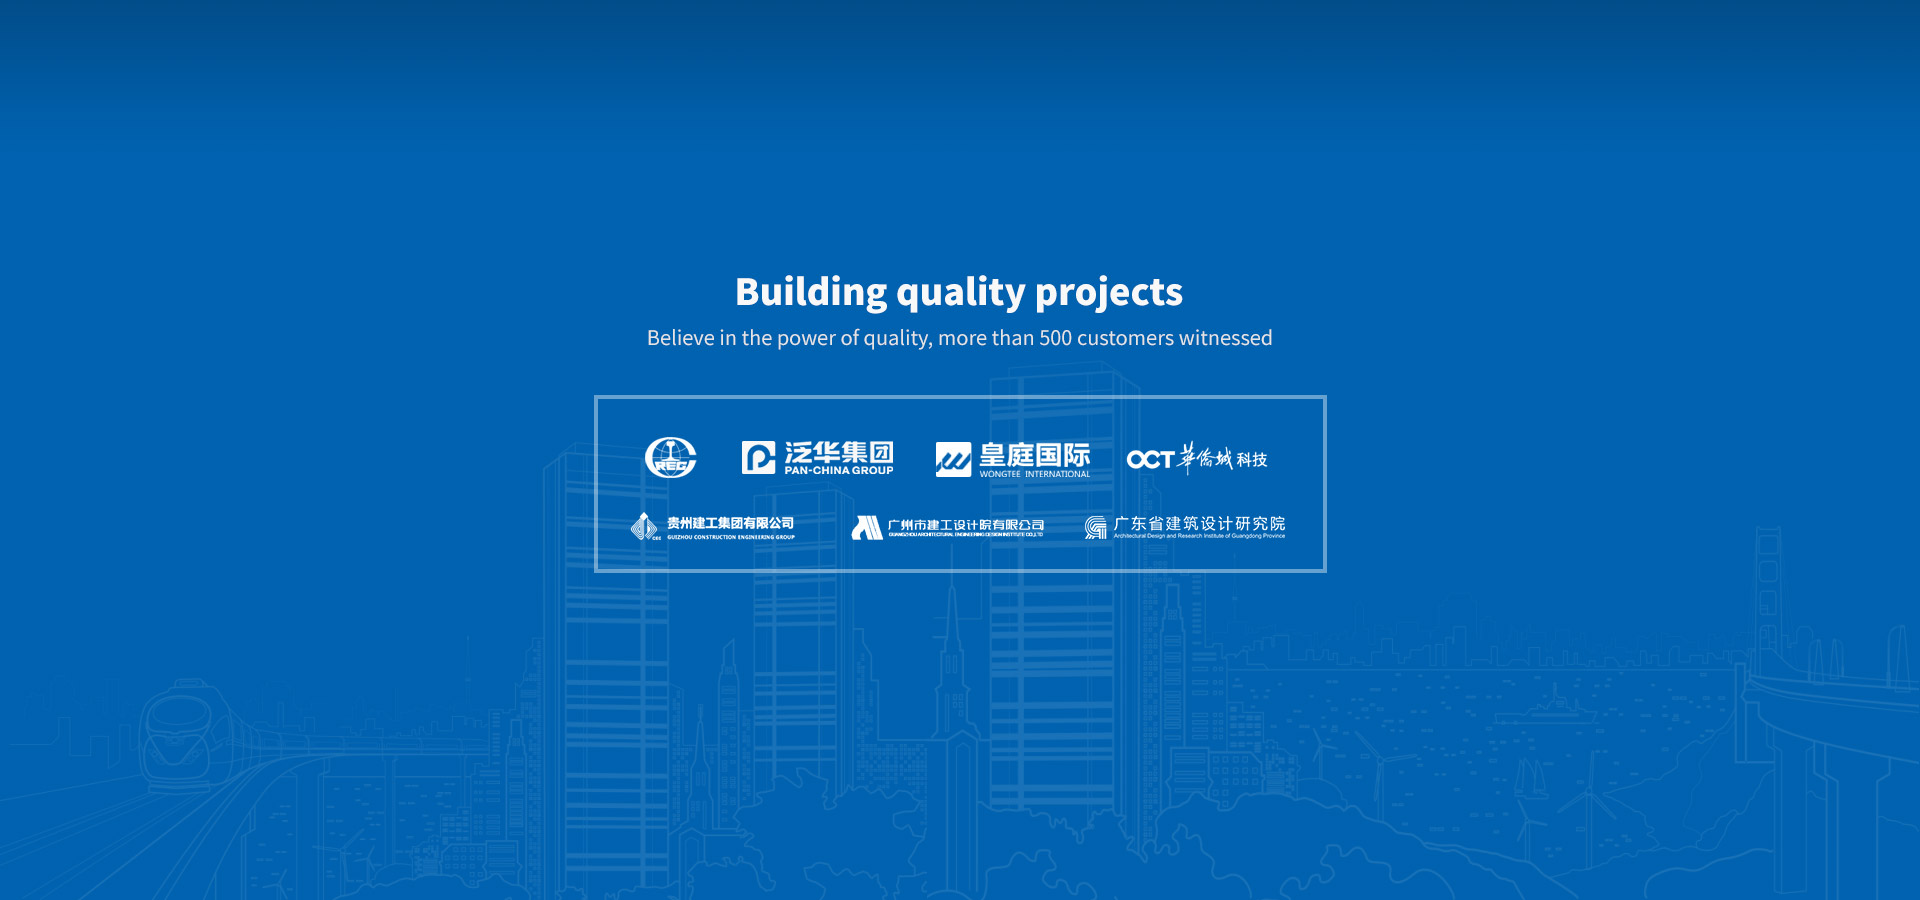 Building quality projects